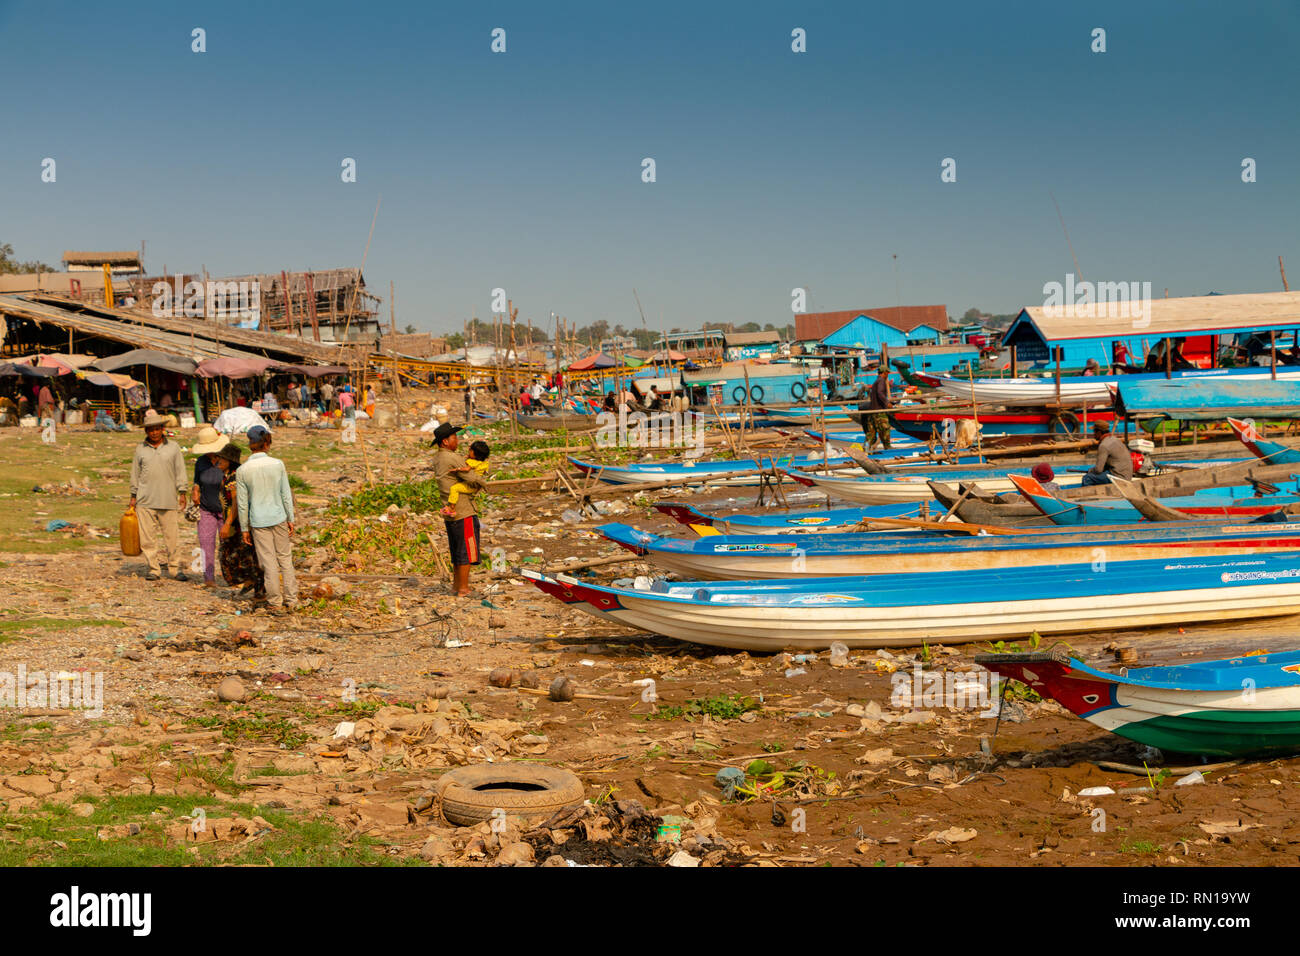 Boats are the only form of transport for families living in  flloating villages on Tonle Sap River, Kampong Chhnang, Mekong Delta, Cambodia, Asia Stock Photo